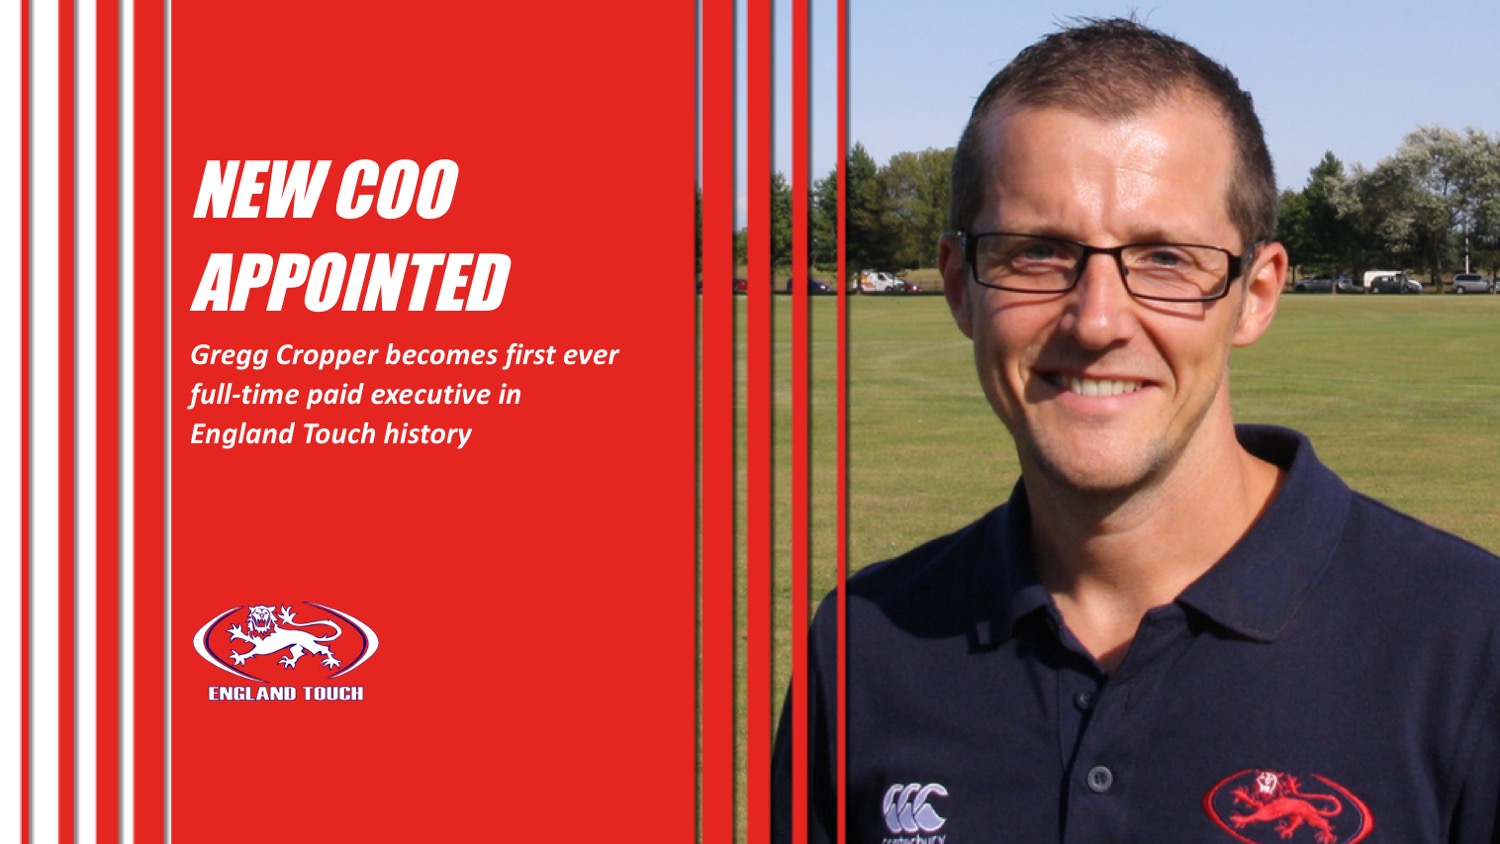 New Chief Operating Officer appointed at England Touch